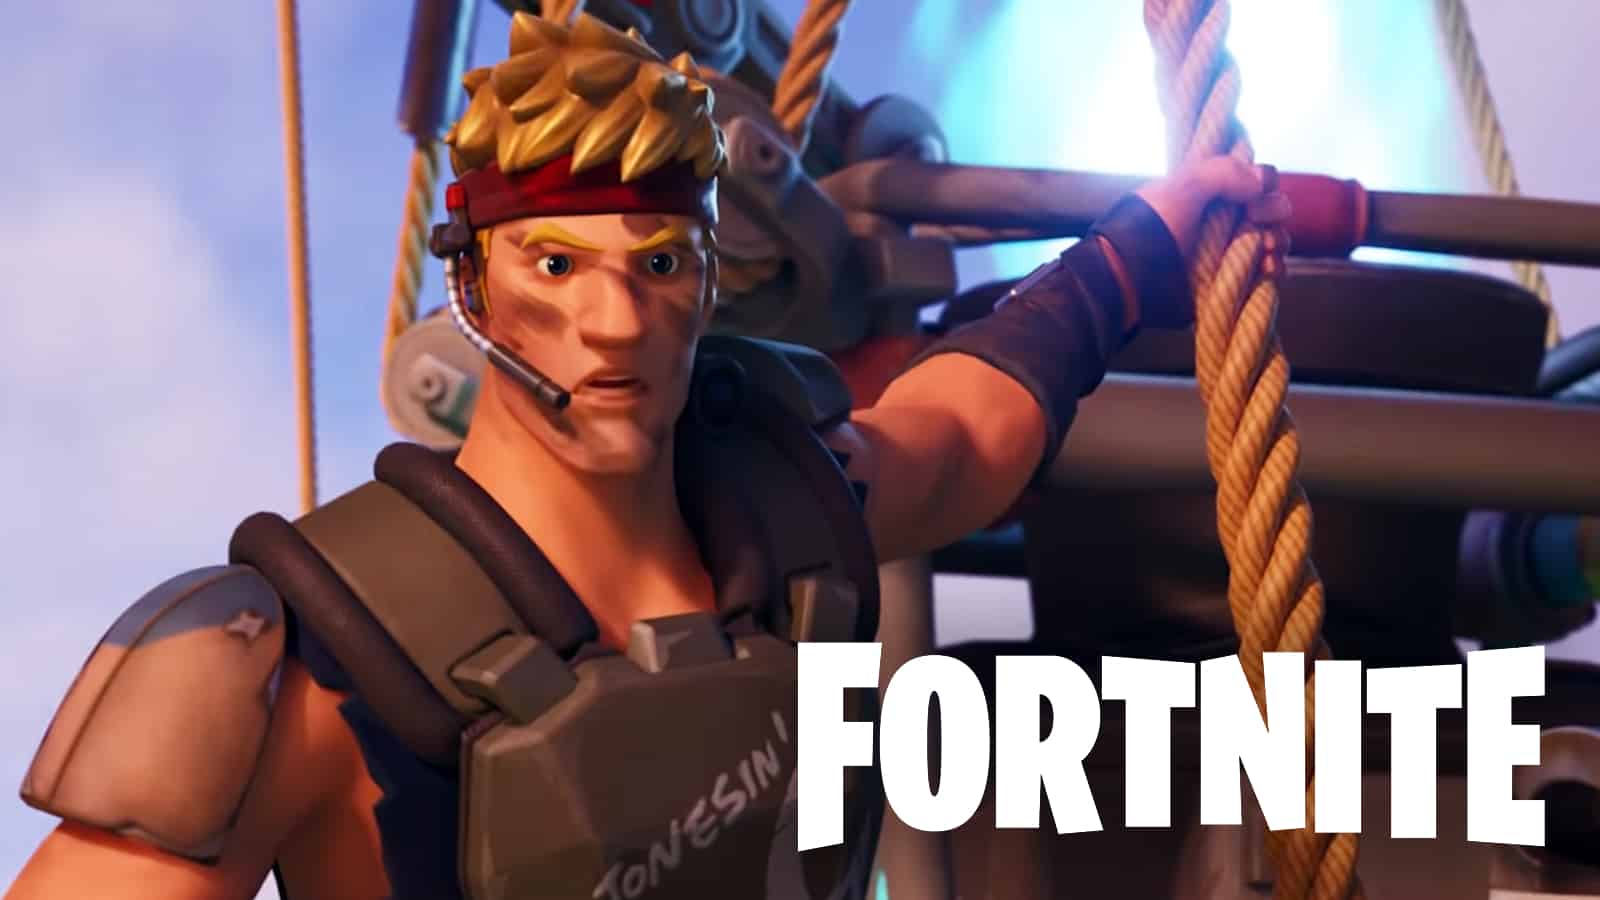 Epic Games are planning to "go beyond battle royale" with new Fortnite open world game mode.